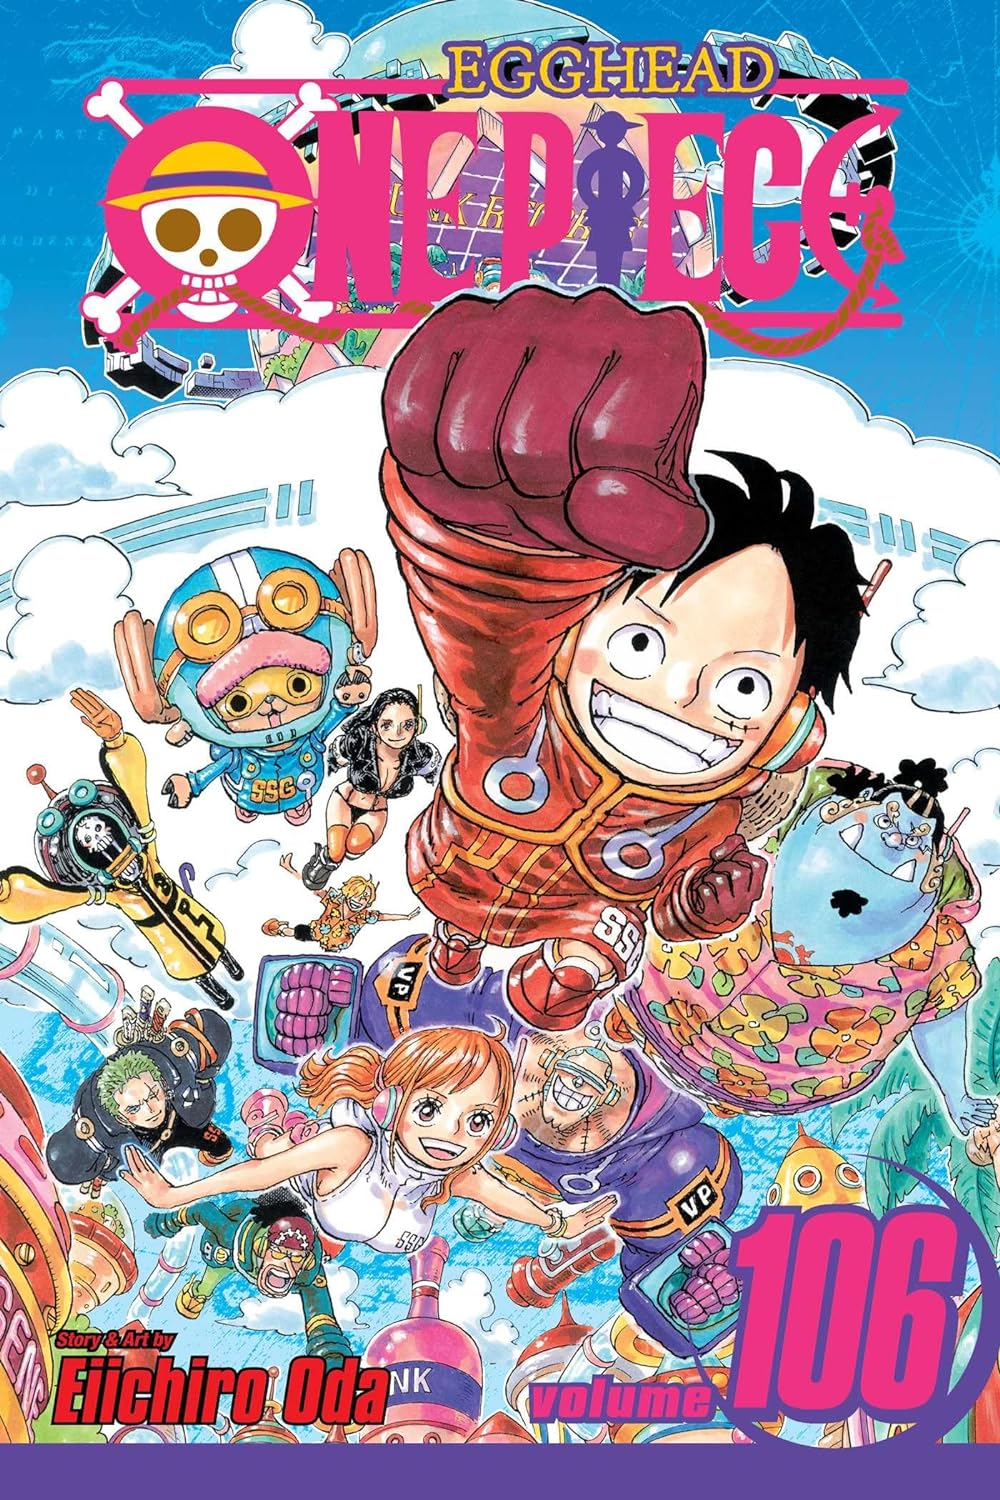 Episode 1000 - One Piece - Anime News Network